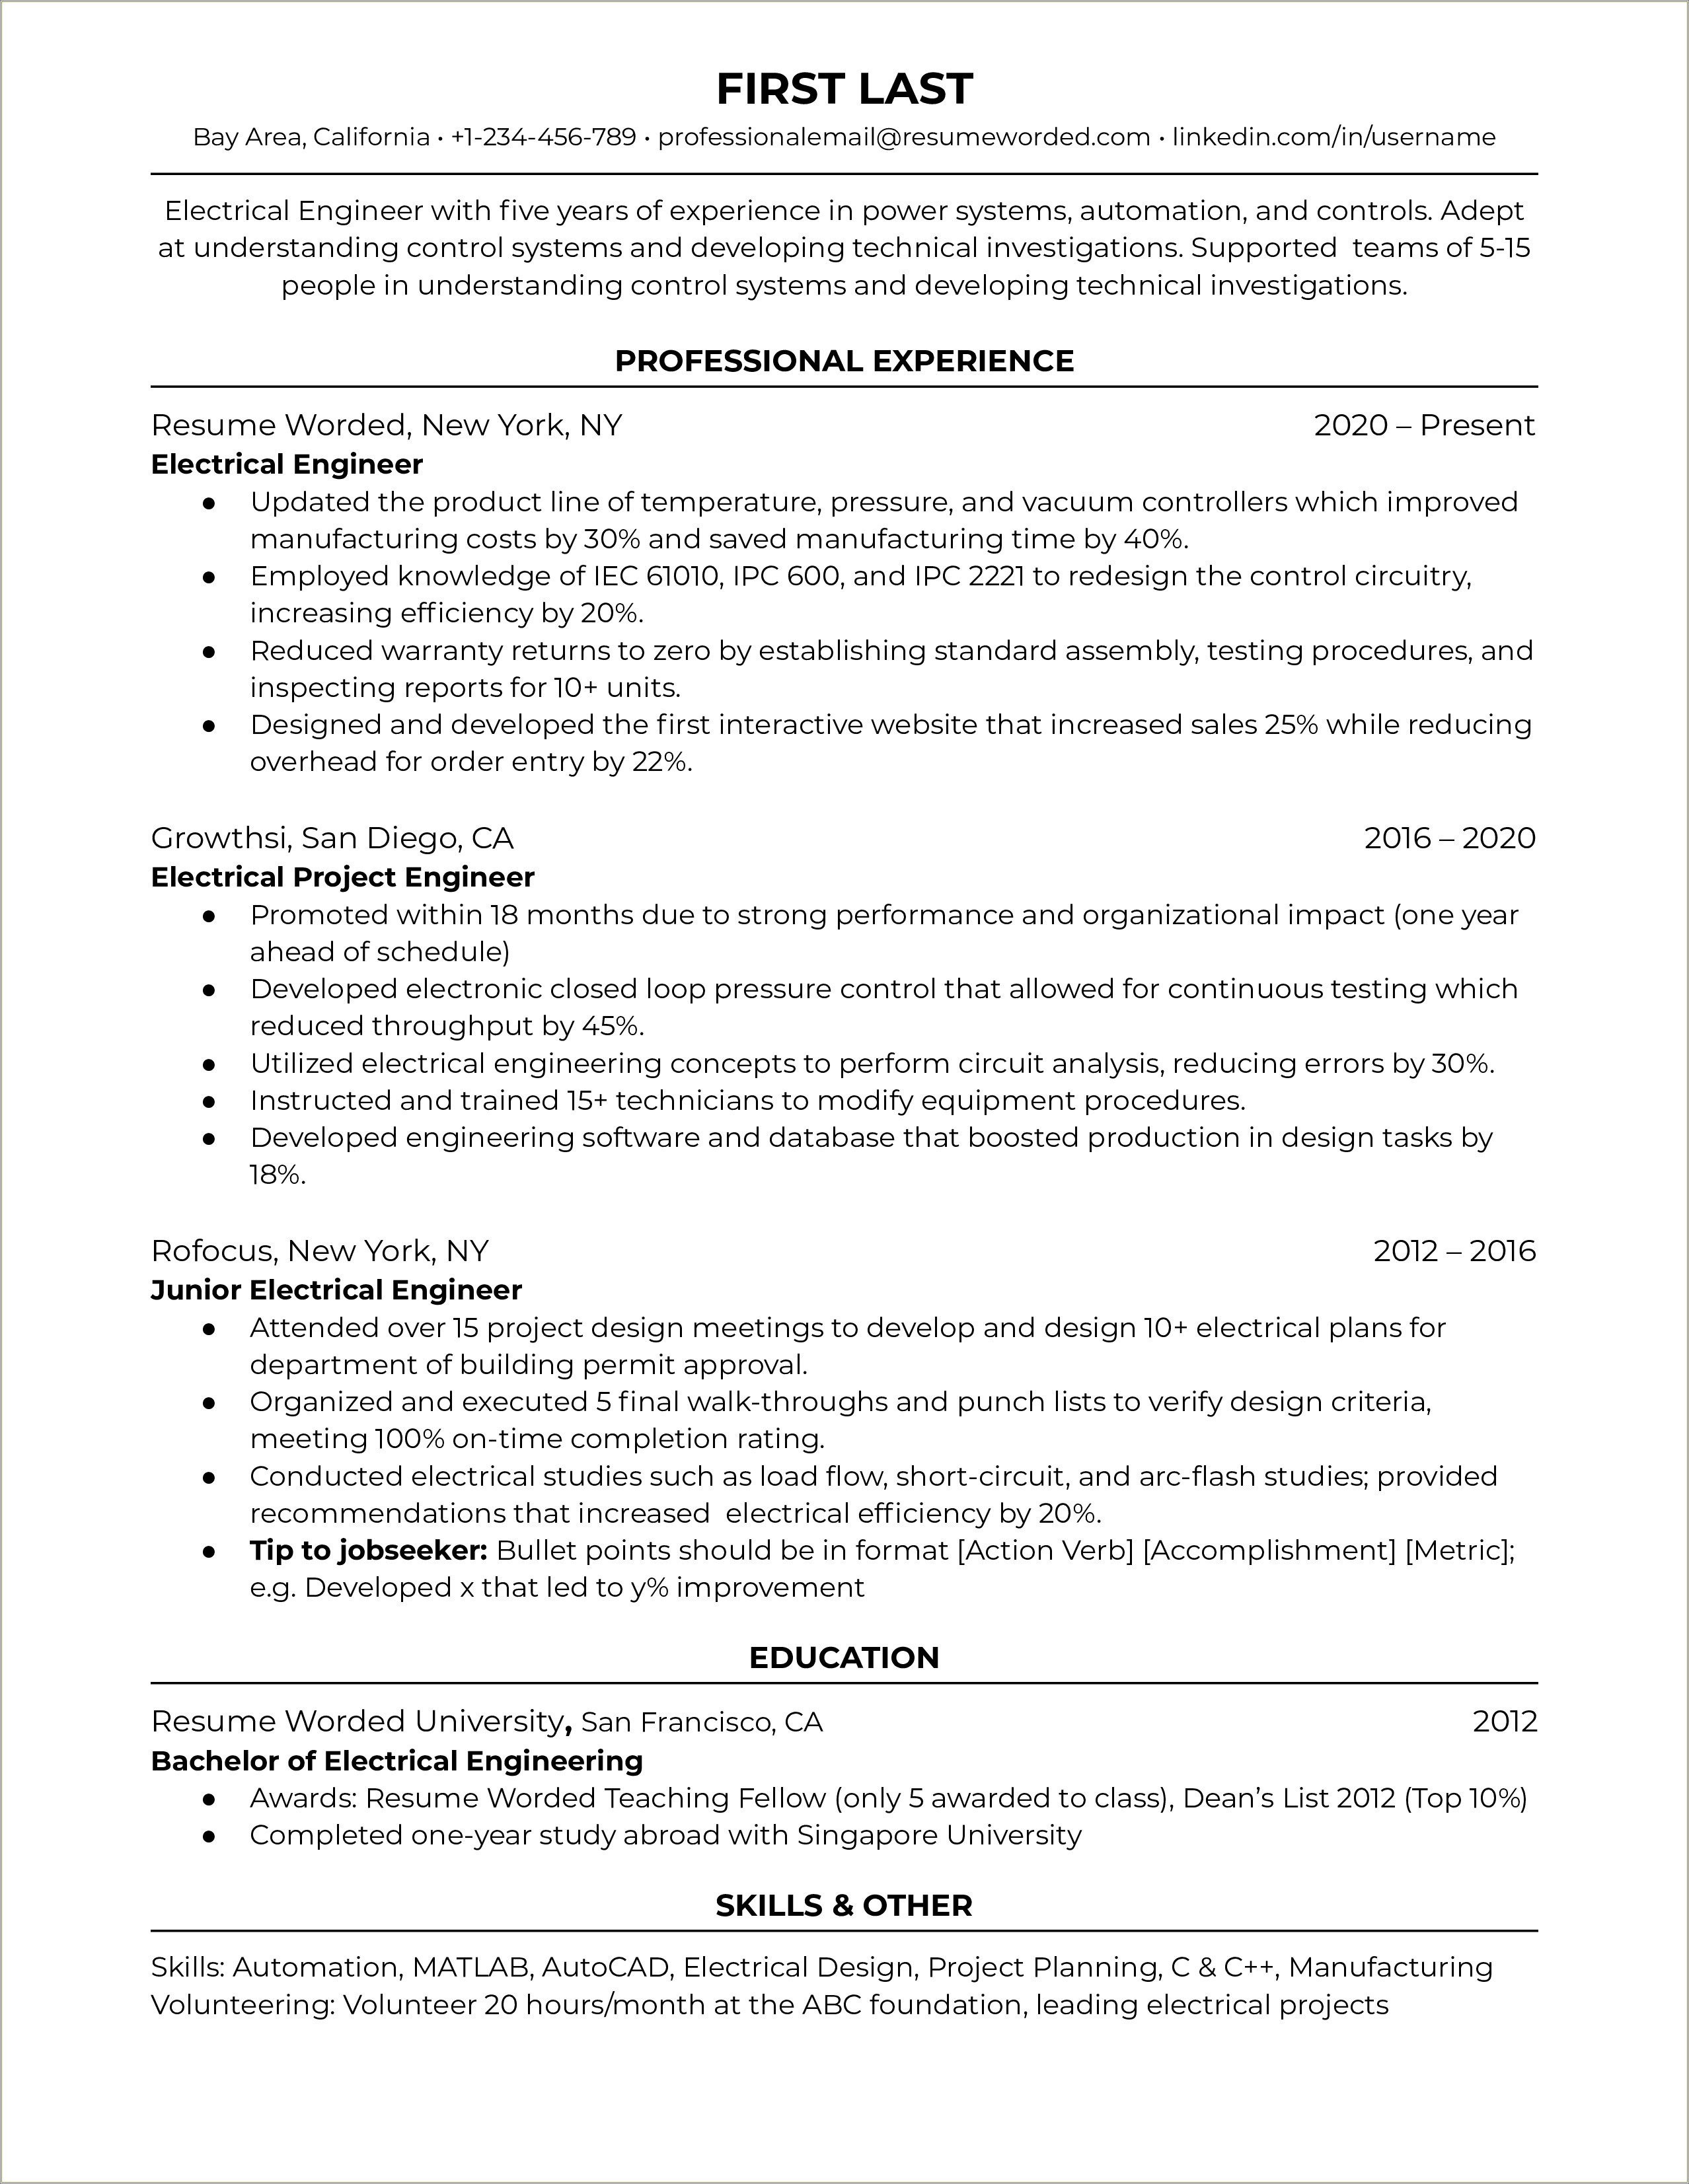 Automation Engineer Objective For Resume